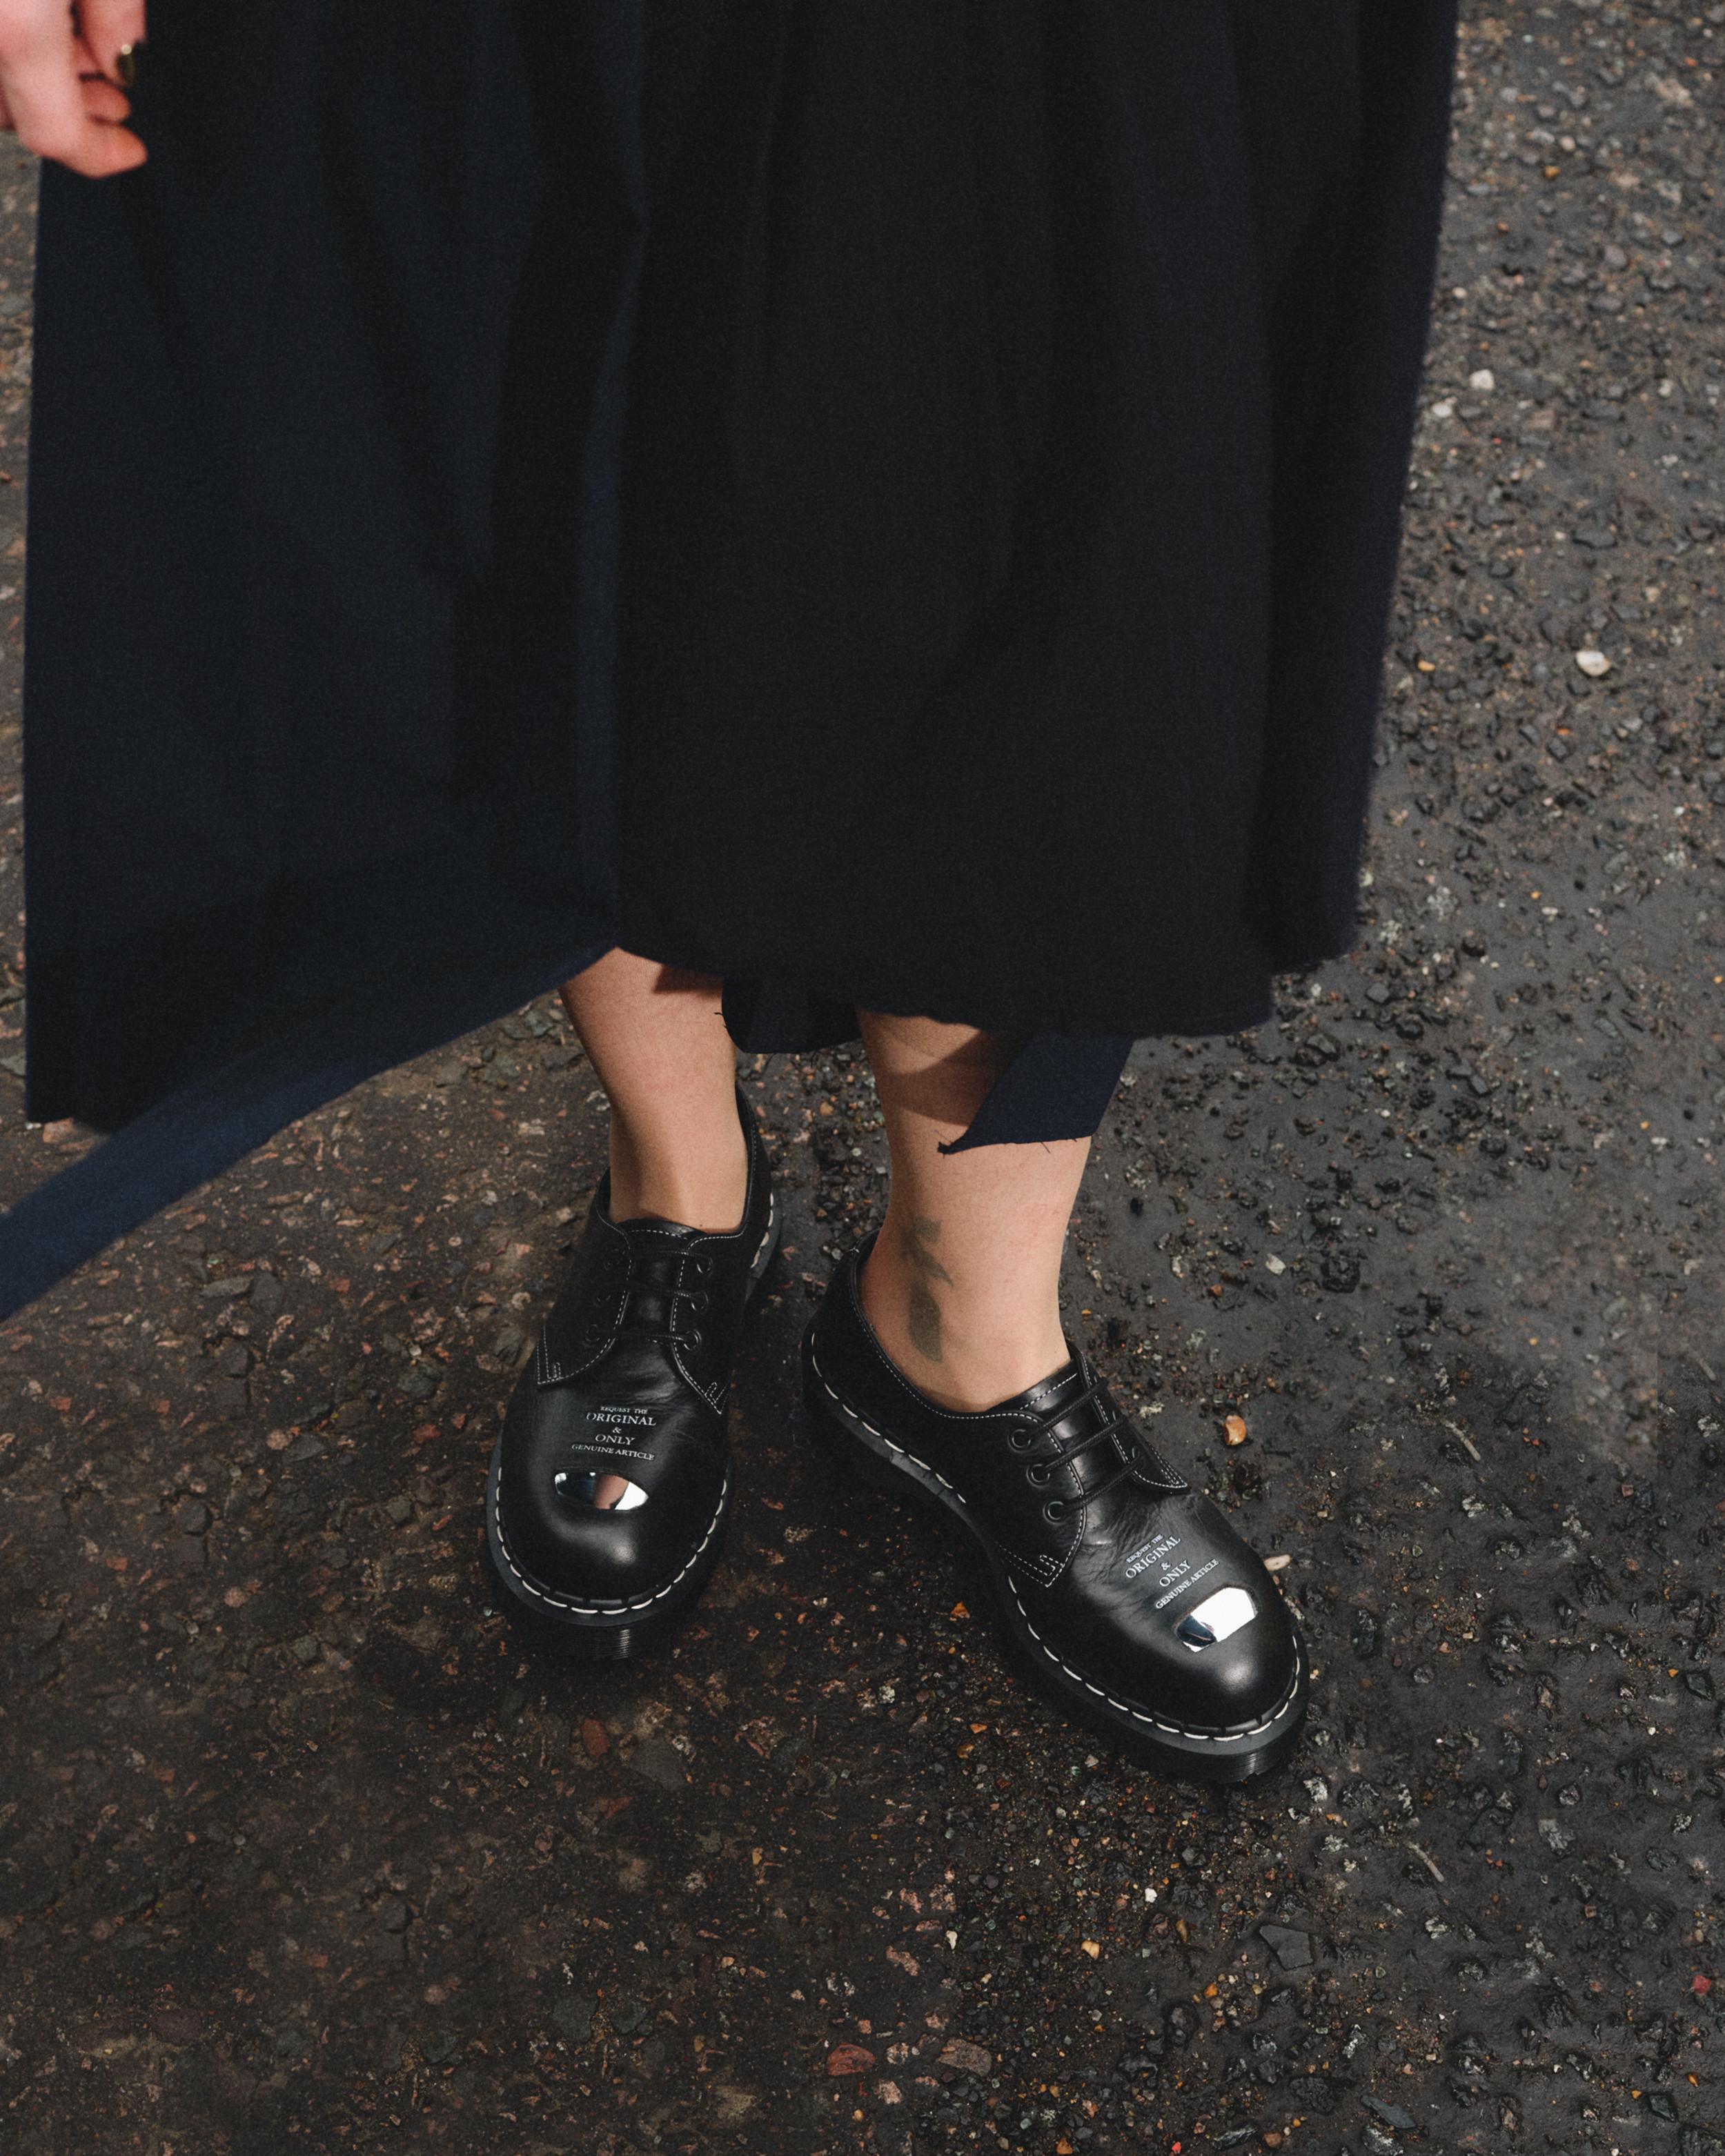 1461 Bex Exposed Steel Toe Oxford Shoes in Black